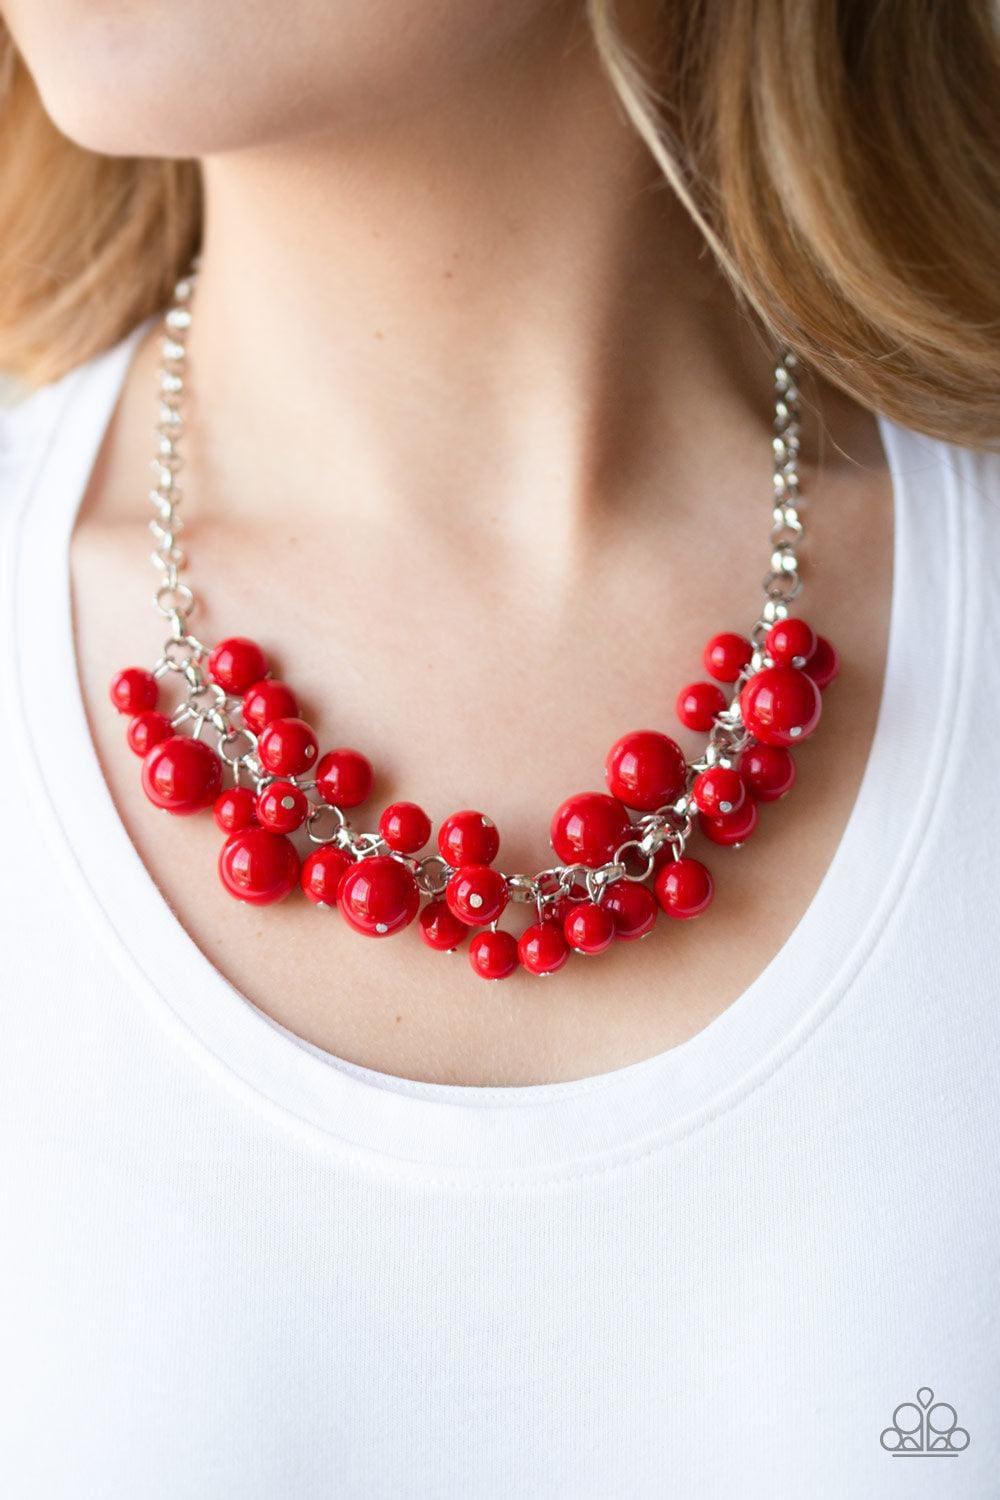 Paparazzi Accessories - Walk This Broadway- Red Necklace - Bling by JessieK